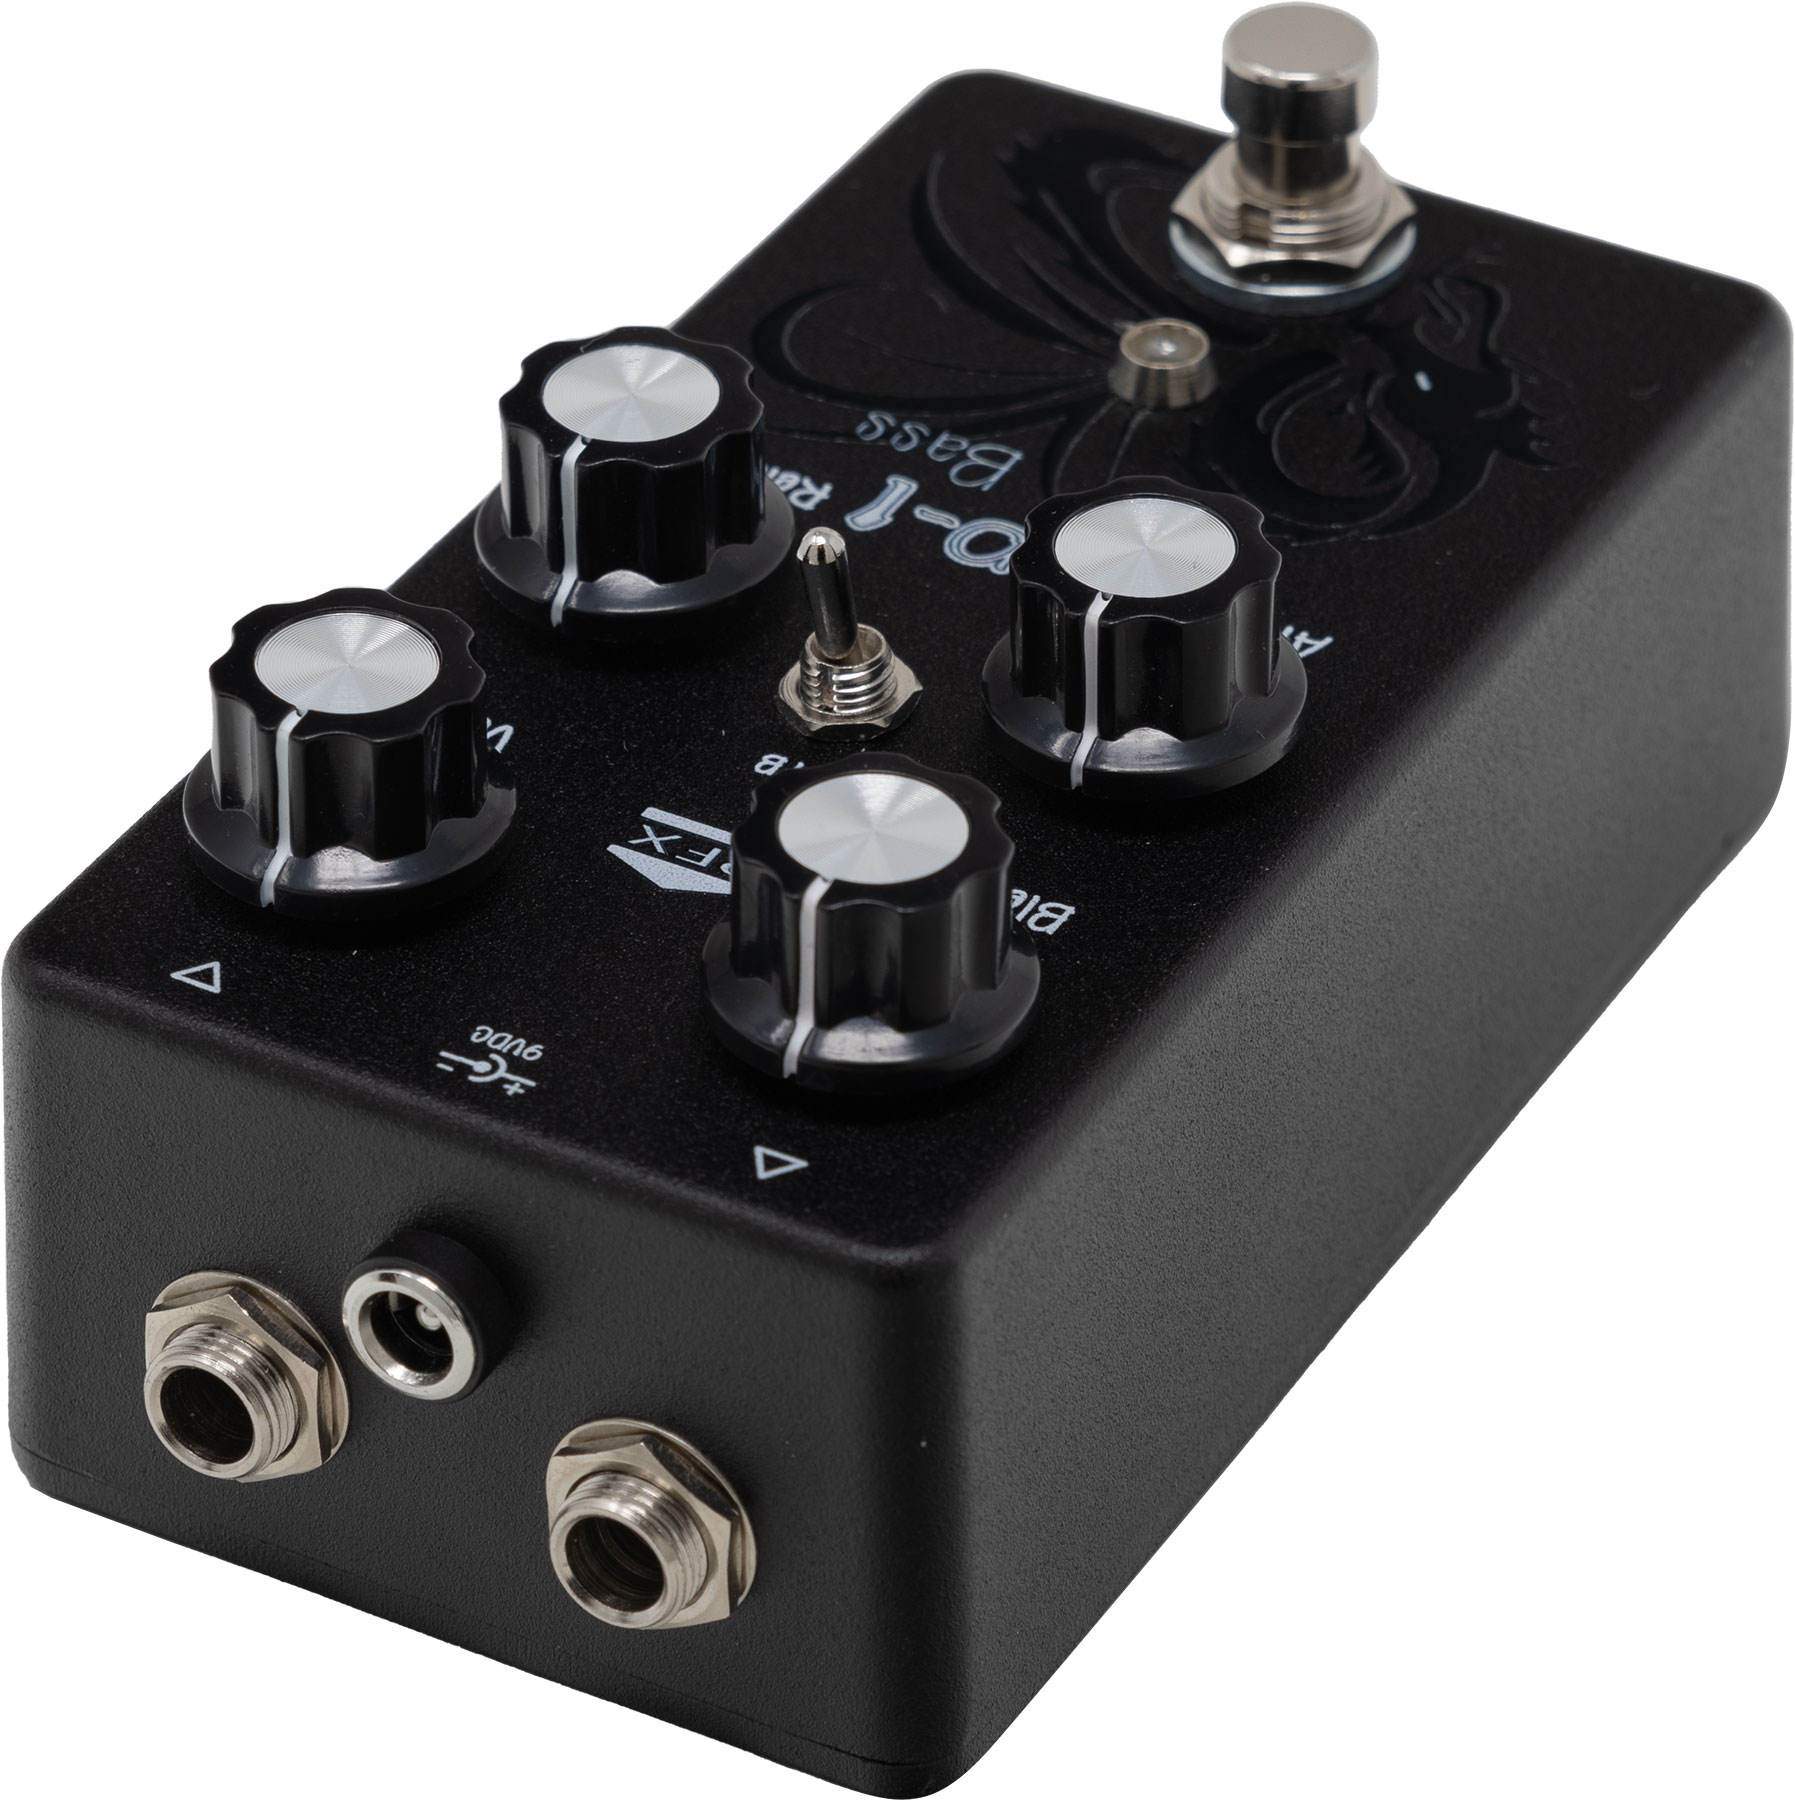 Pfx Circuits Kp-1b Bass Silent Compressor  Sustainer - Compressor, sustain & noise gate effect pedal for bass - Variation 2